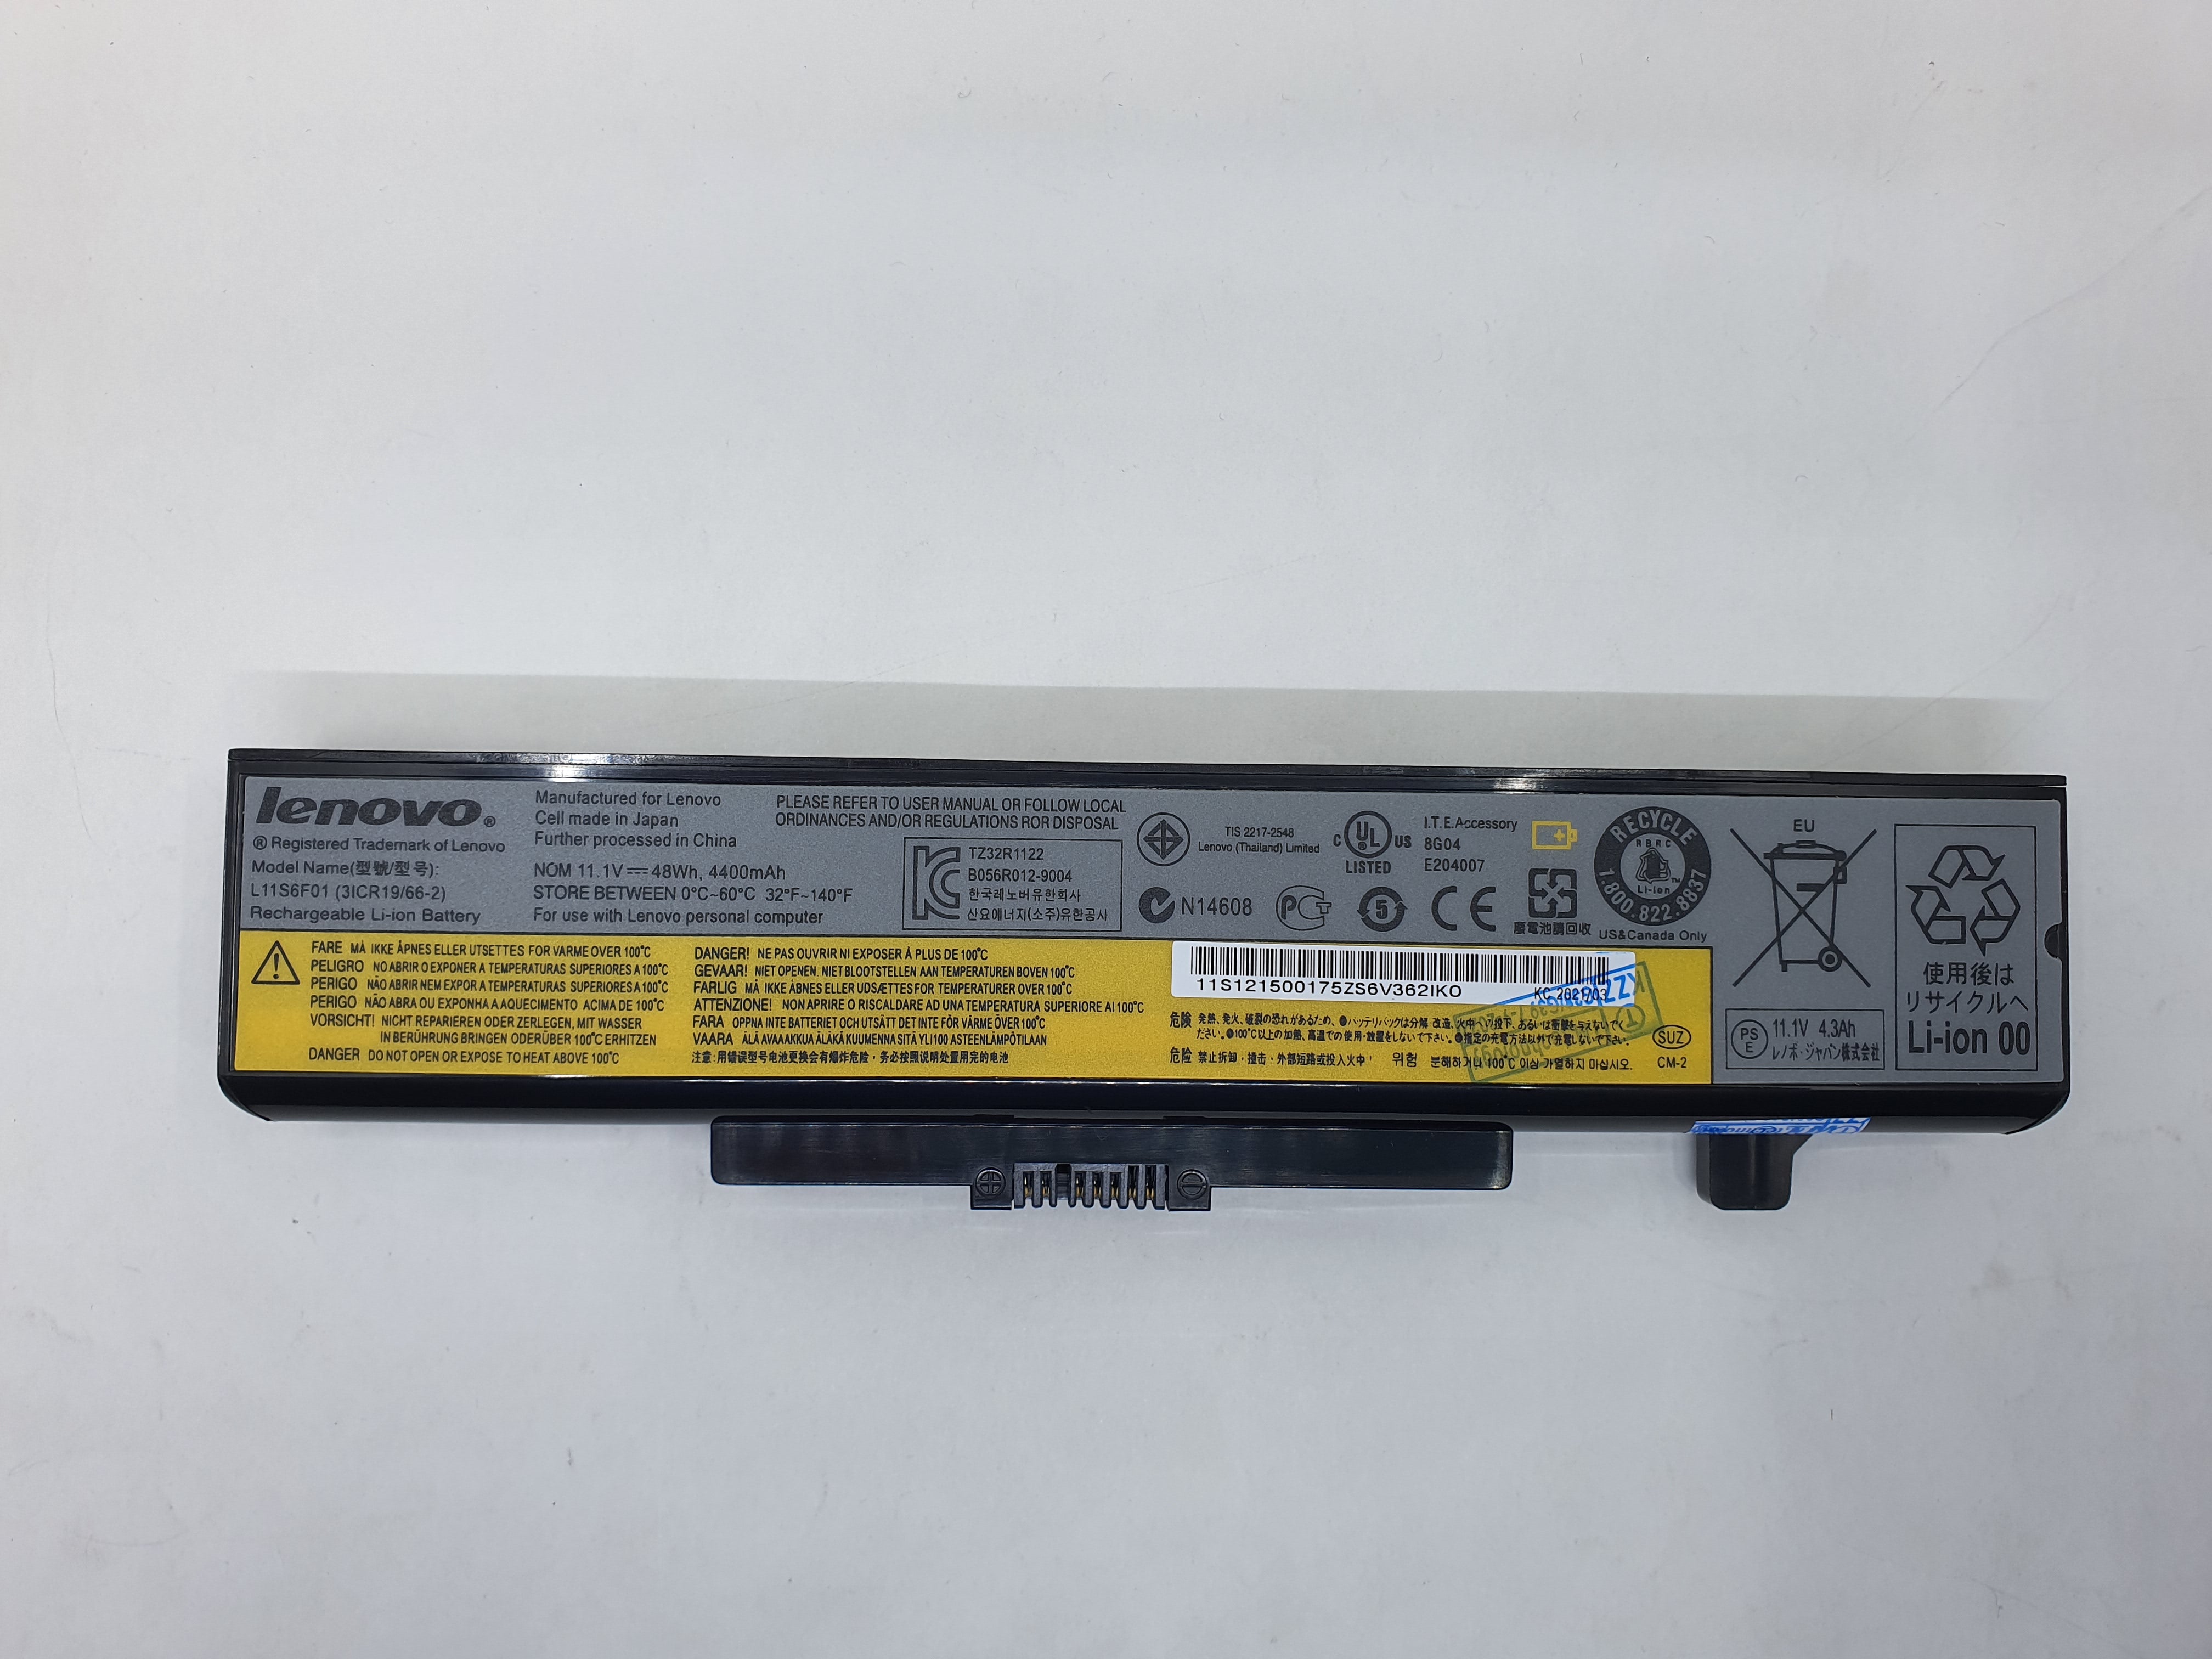 Lenovo Battery G40 A1 for Replacement - Lenovo IdeaPad G480